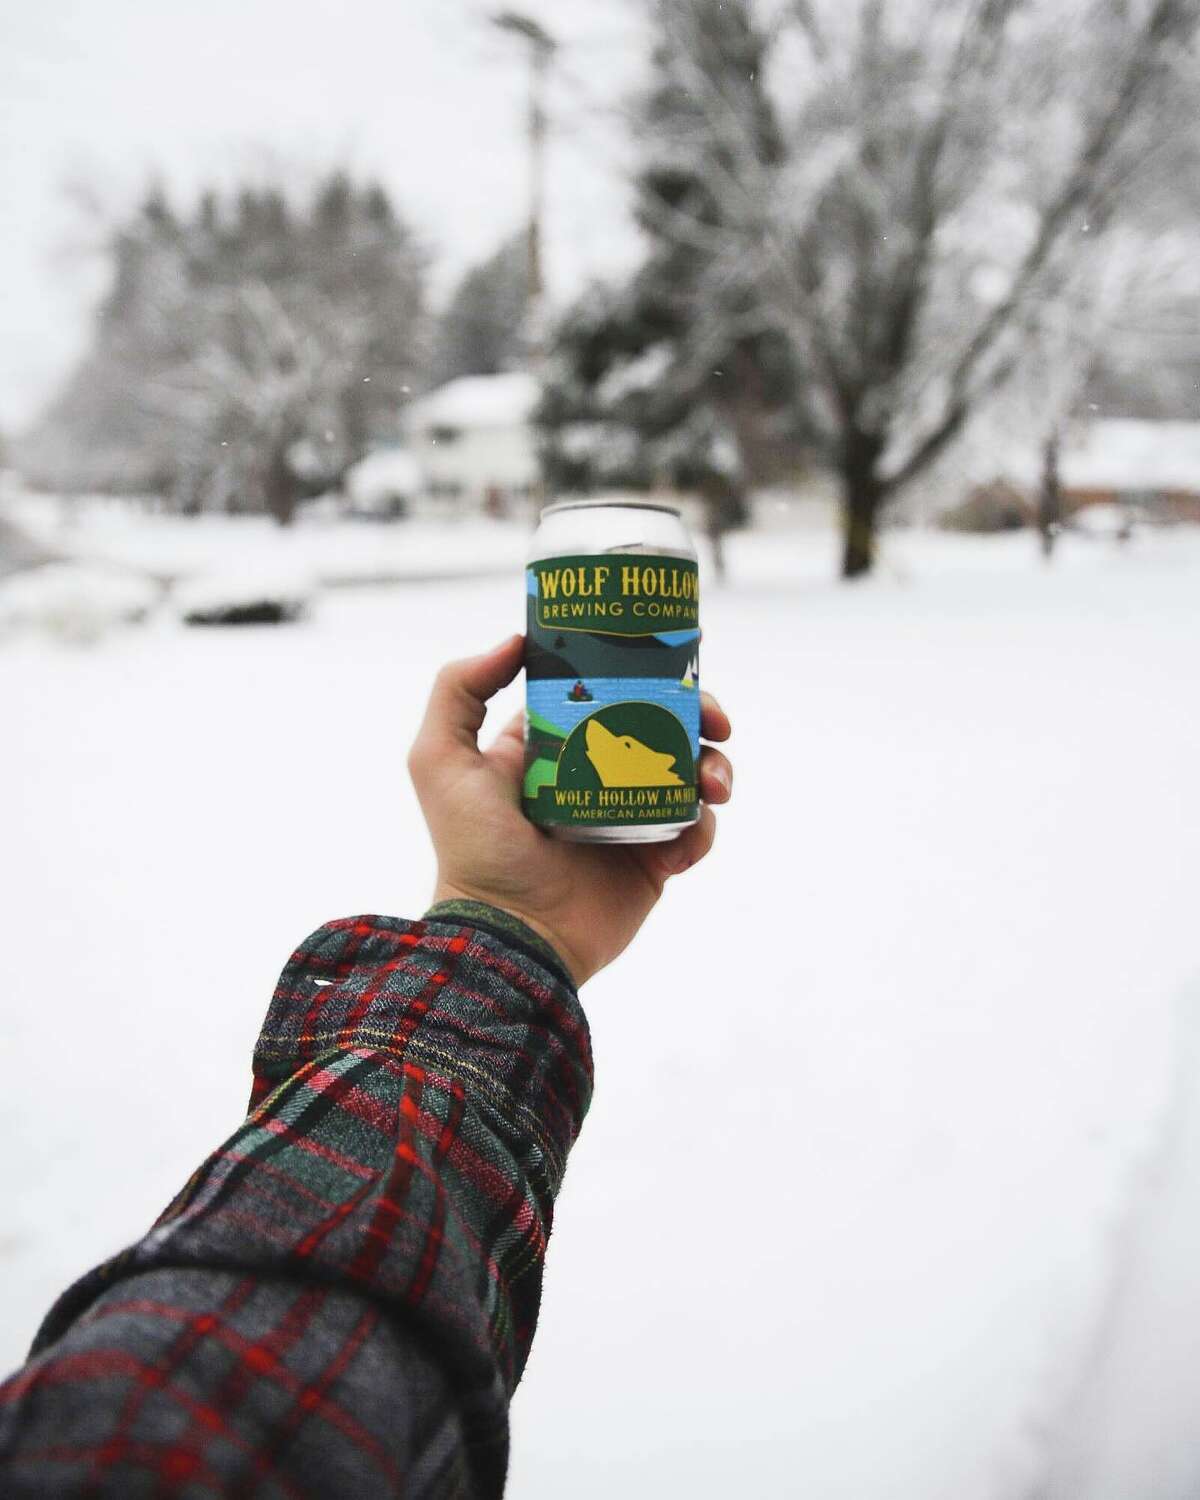 A Maple-Beer Trail is open on Route 5 in West Glenville. The quarter-mile-long hiking trail links Wolf Hollow Brewing Company with Riverside Maple Farms. (Provided photo)